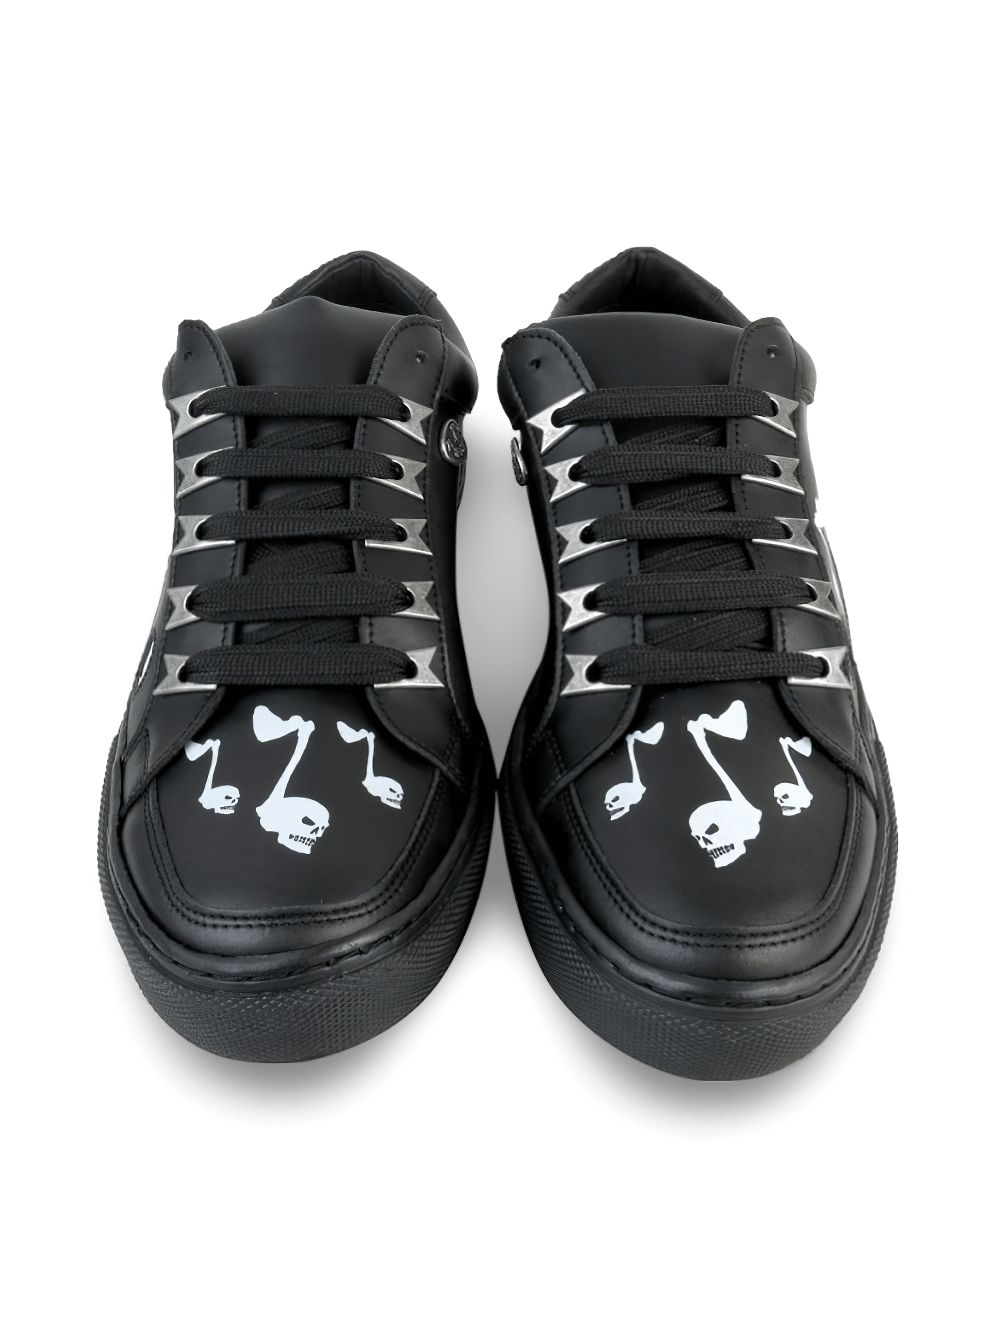 Unisex Black Ghost Print Sneakers with Lace-Up